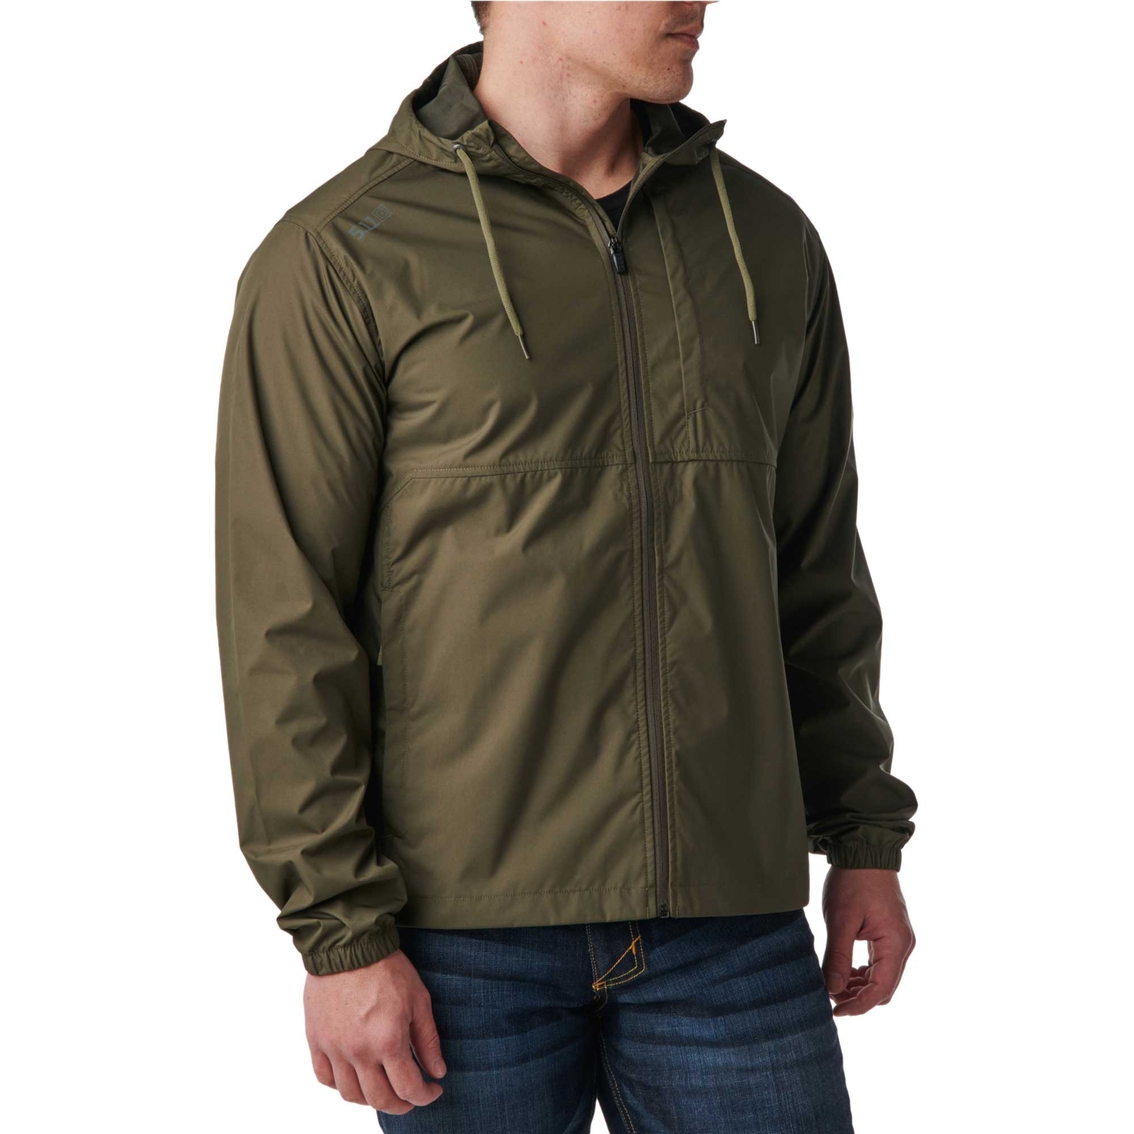 5.11 Packable Jacket - Image 3 of 7